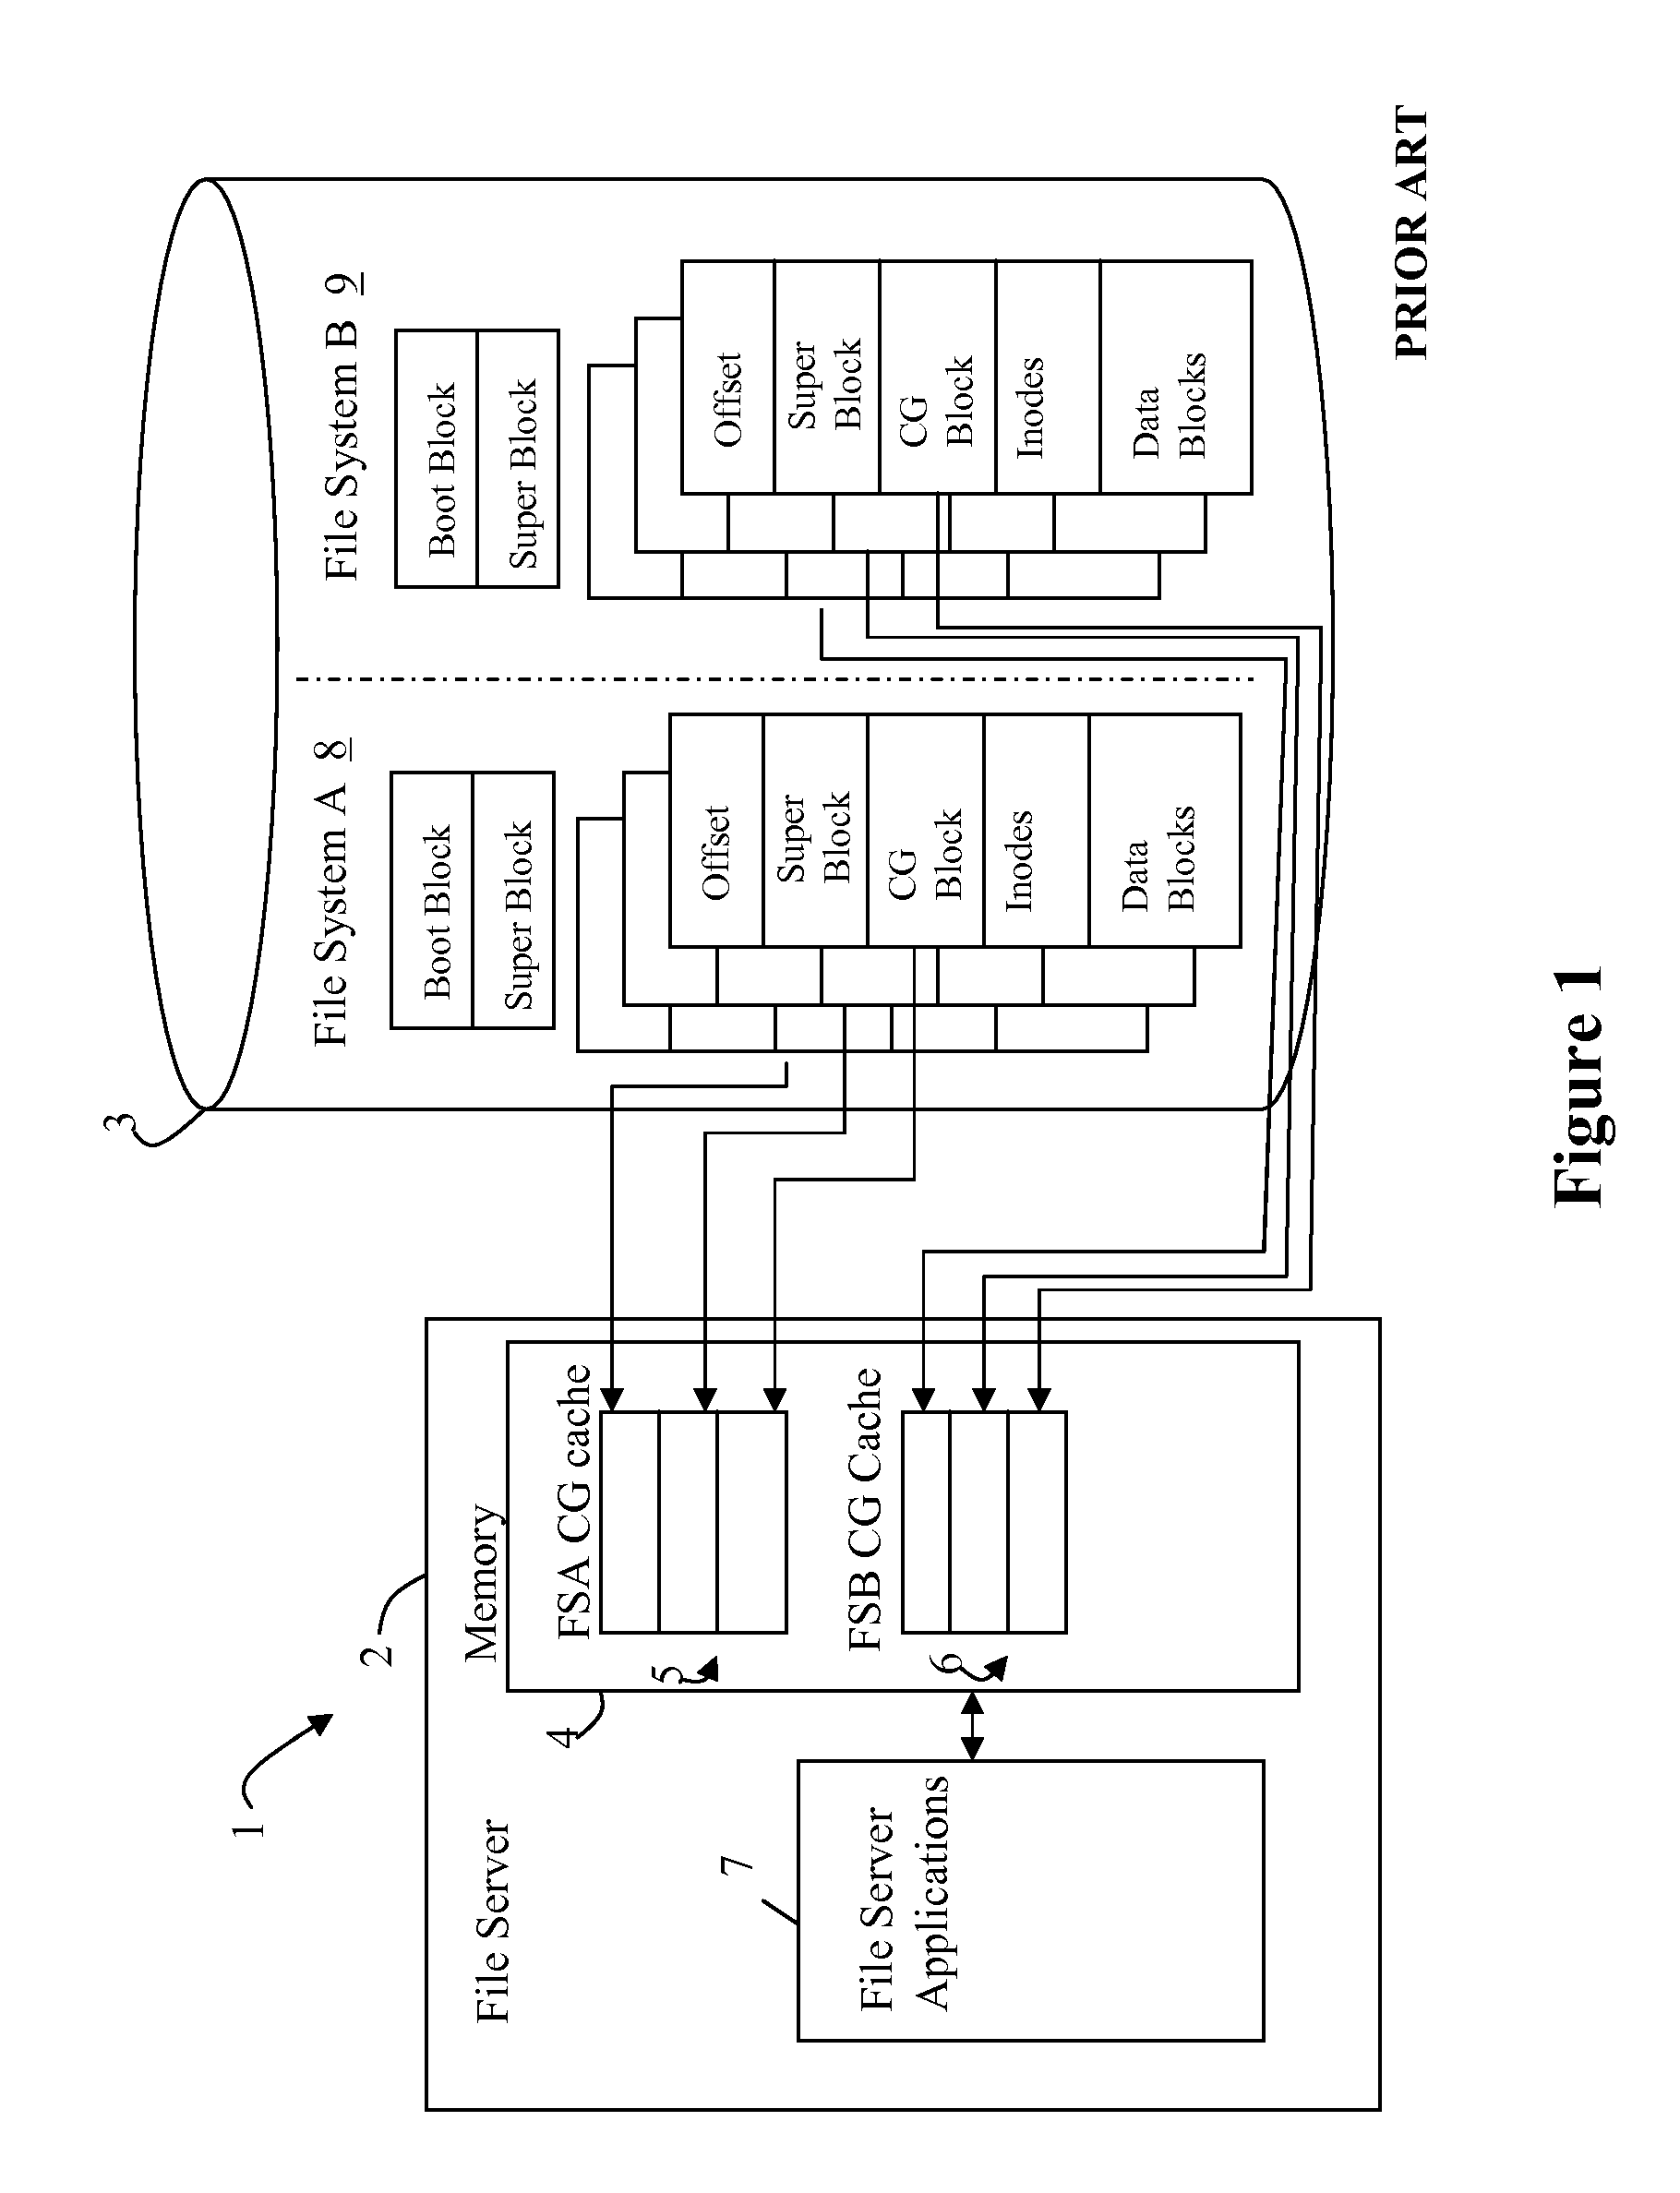 Global UNIX file system cylinder group cache